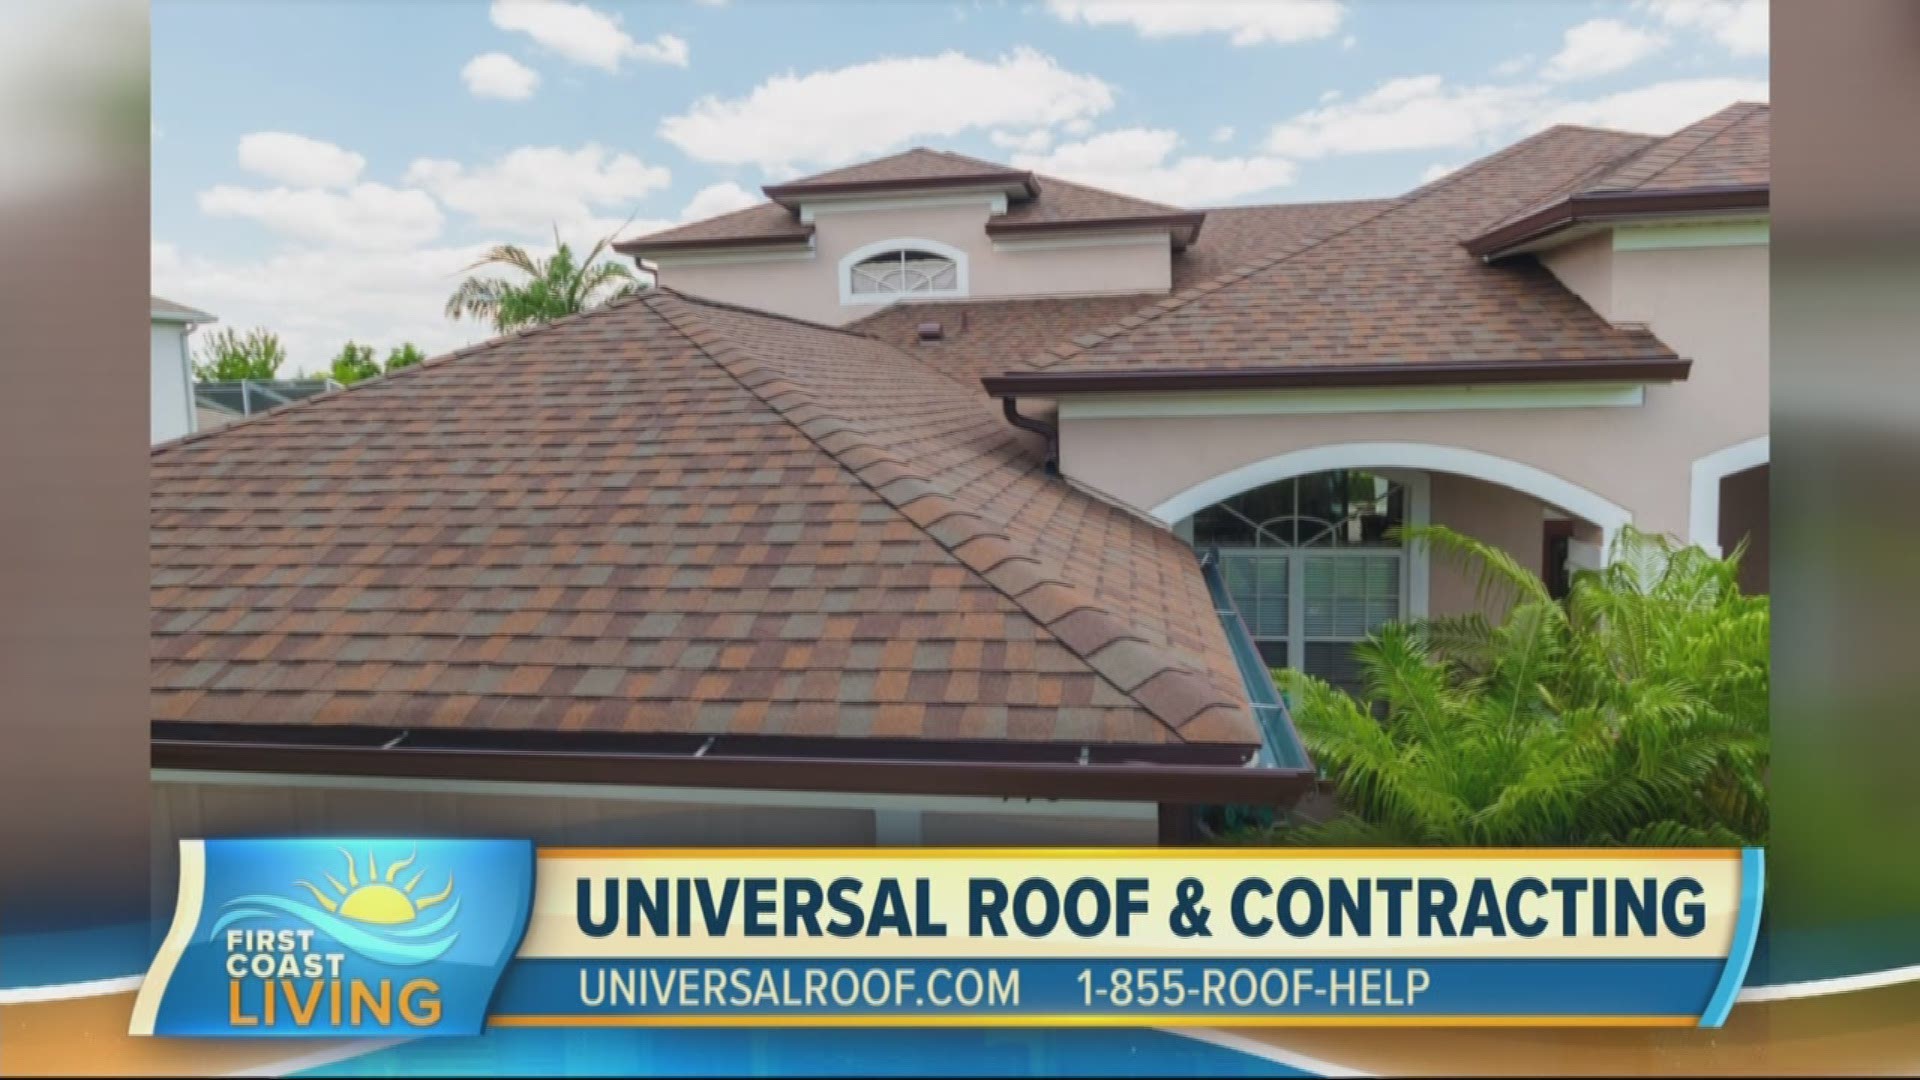 Are you in the market for a new roof? Check out Universal Roof & Contracting.